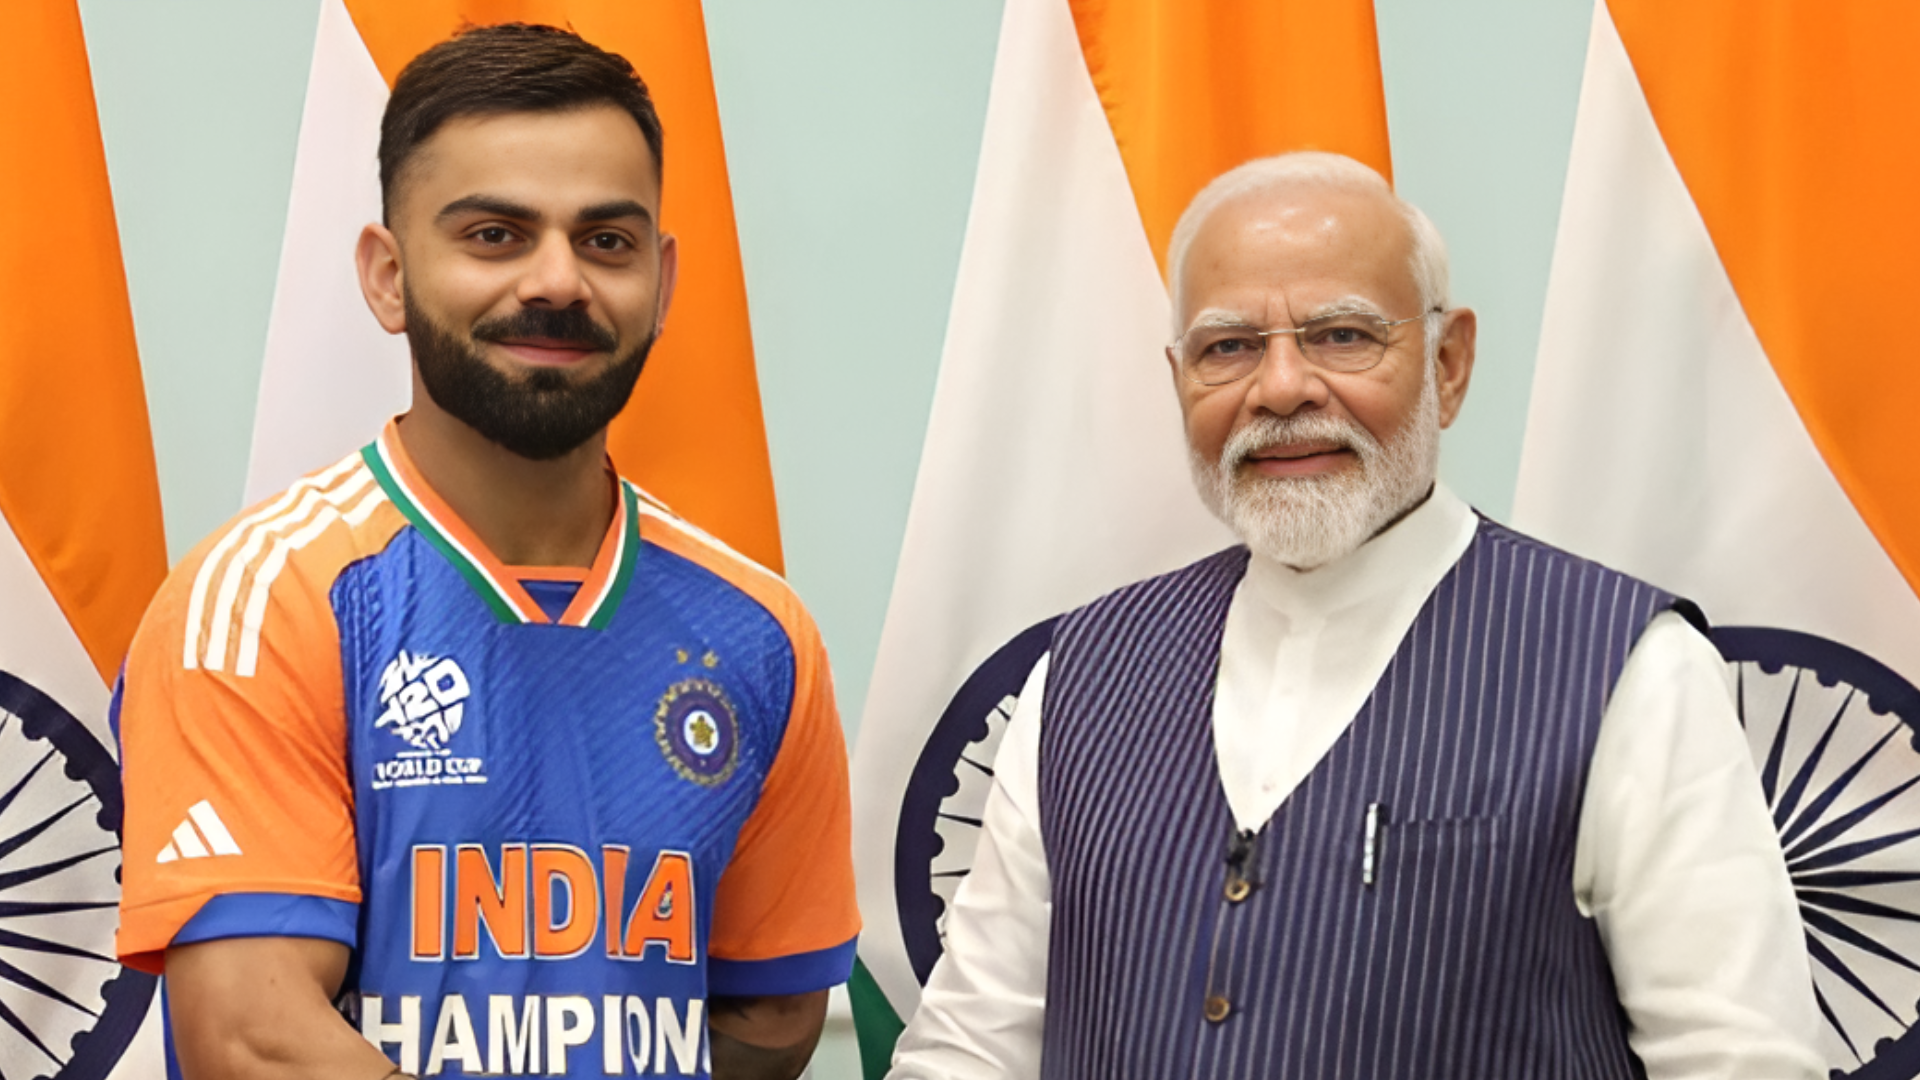 Virat Kohli Opens Up About Not Being Confident Ahead Of T20 World Cup Final, Here’s What He Told Rohit Sharma